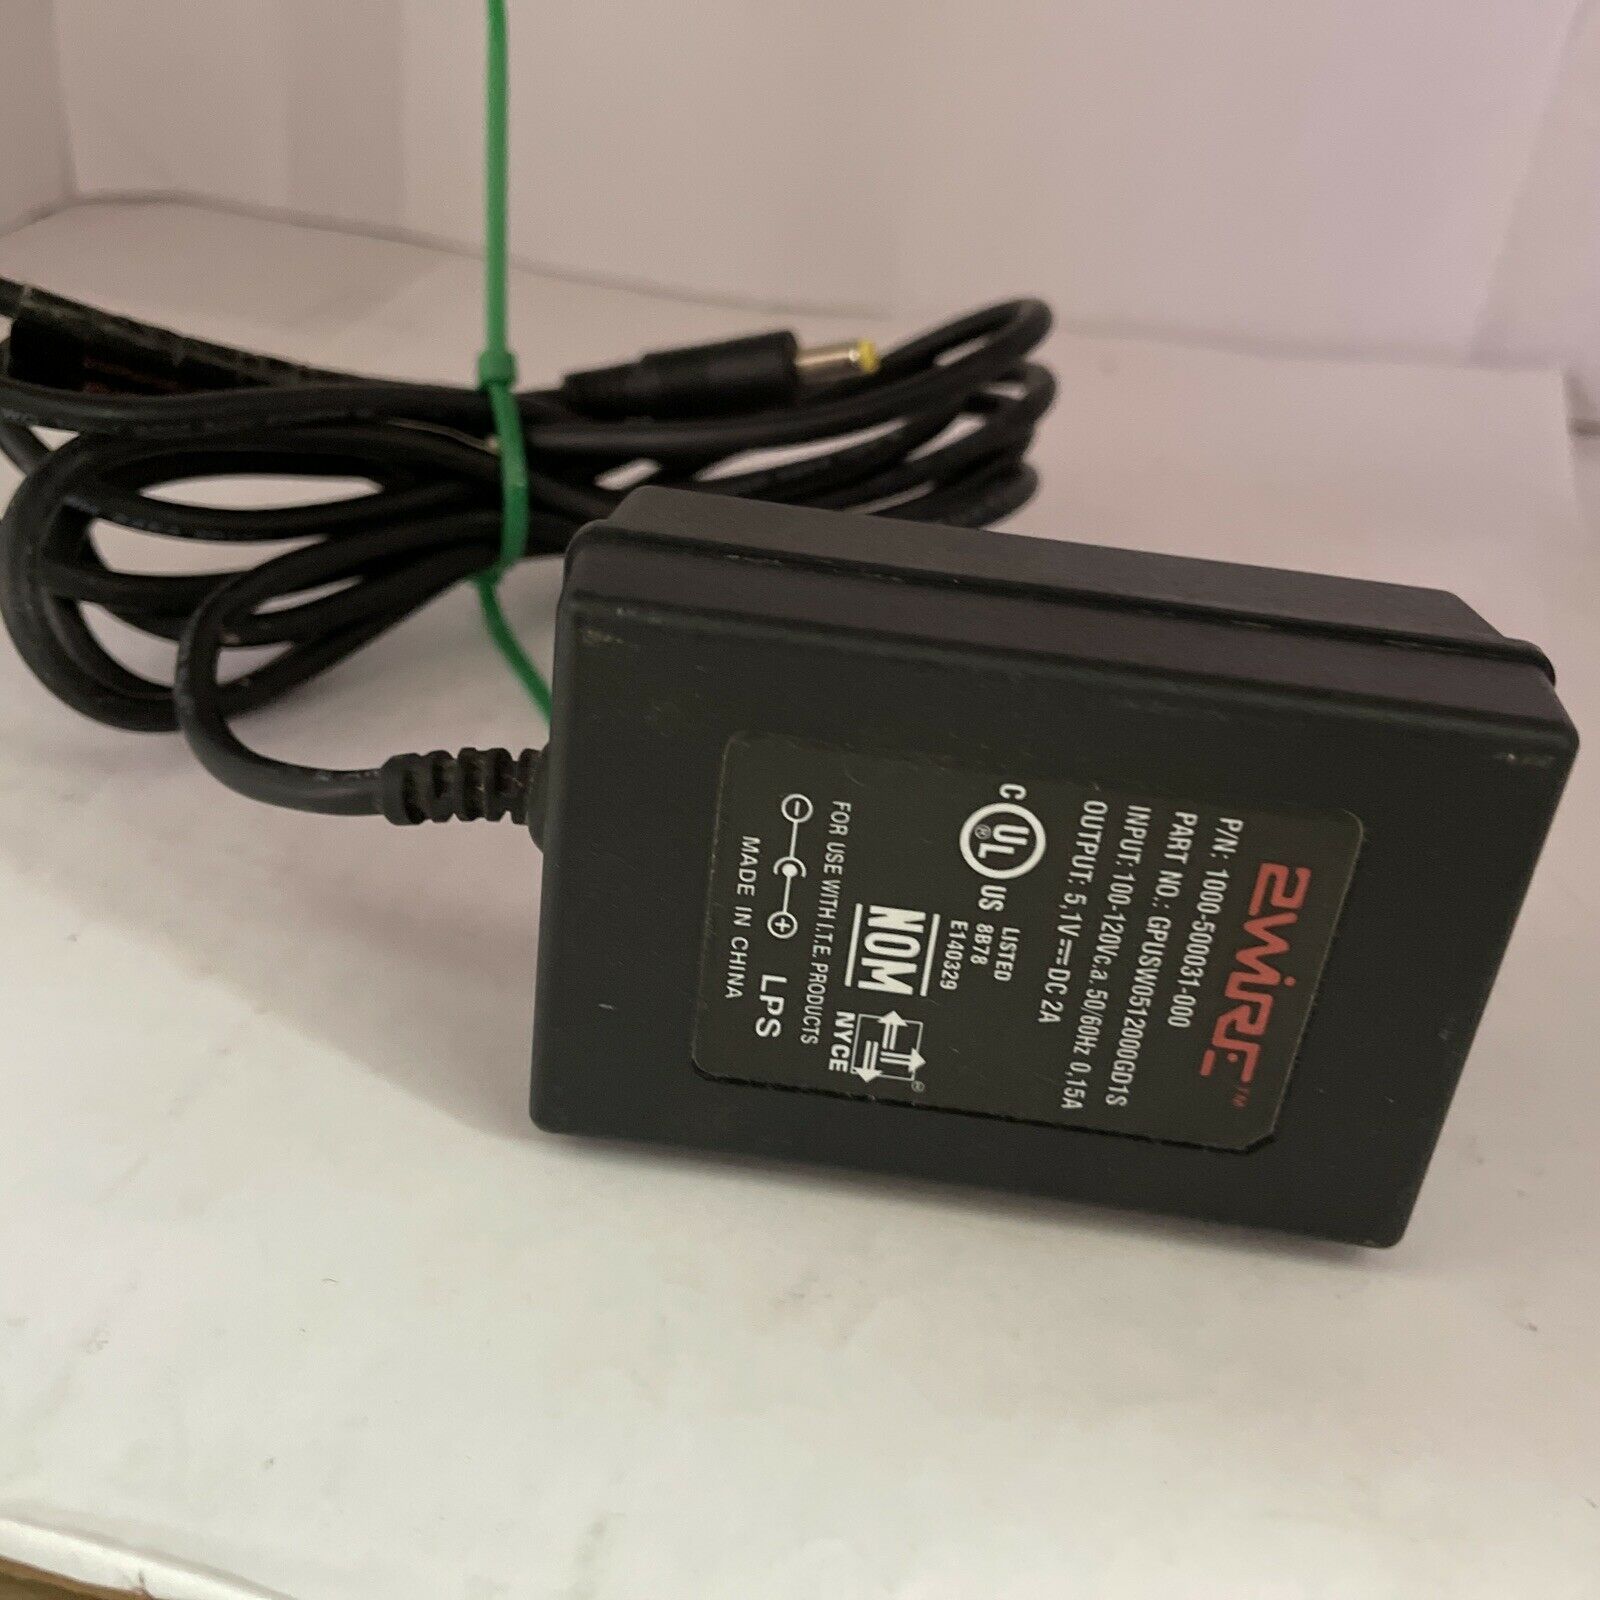 2Wire GPUSW0512000GD1S Power Supply Adapter Output DC 5.1V 2A Transformer Brand: 2Wire Type: Transformer MPN: Do